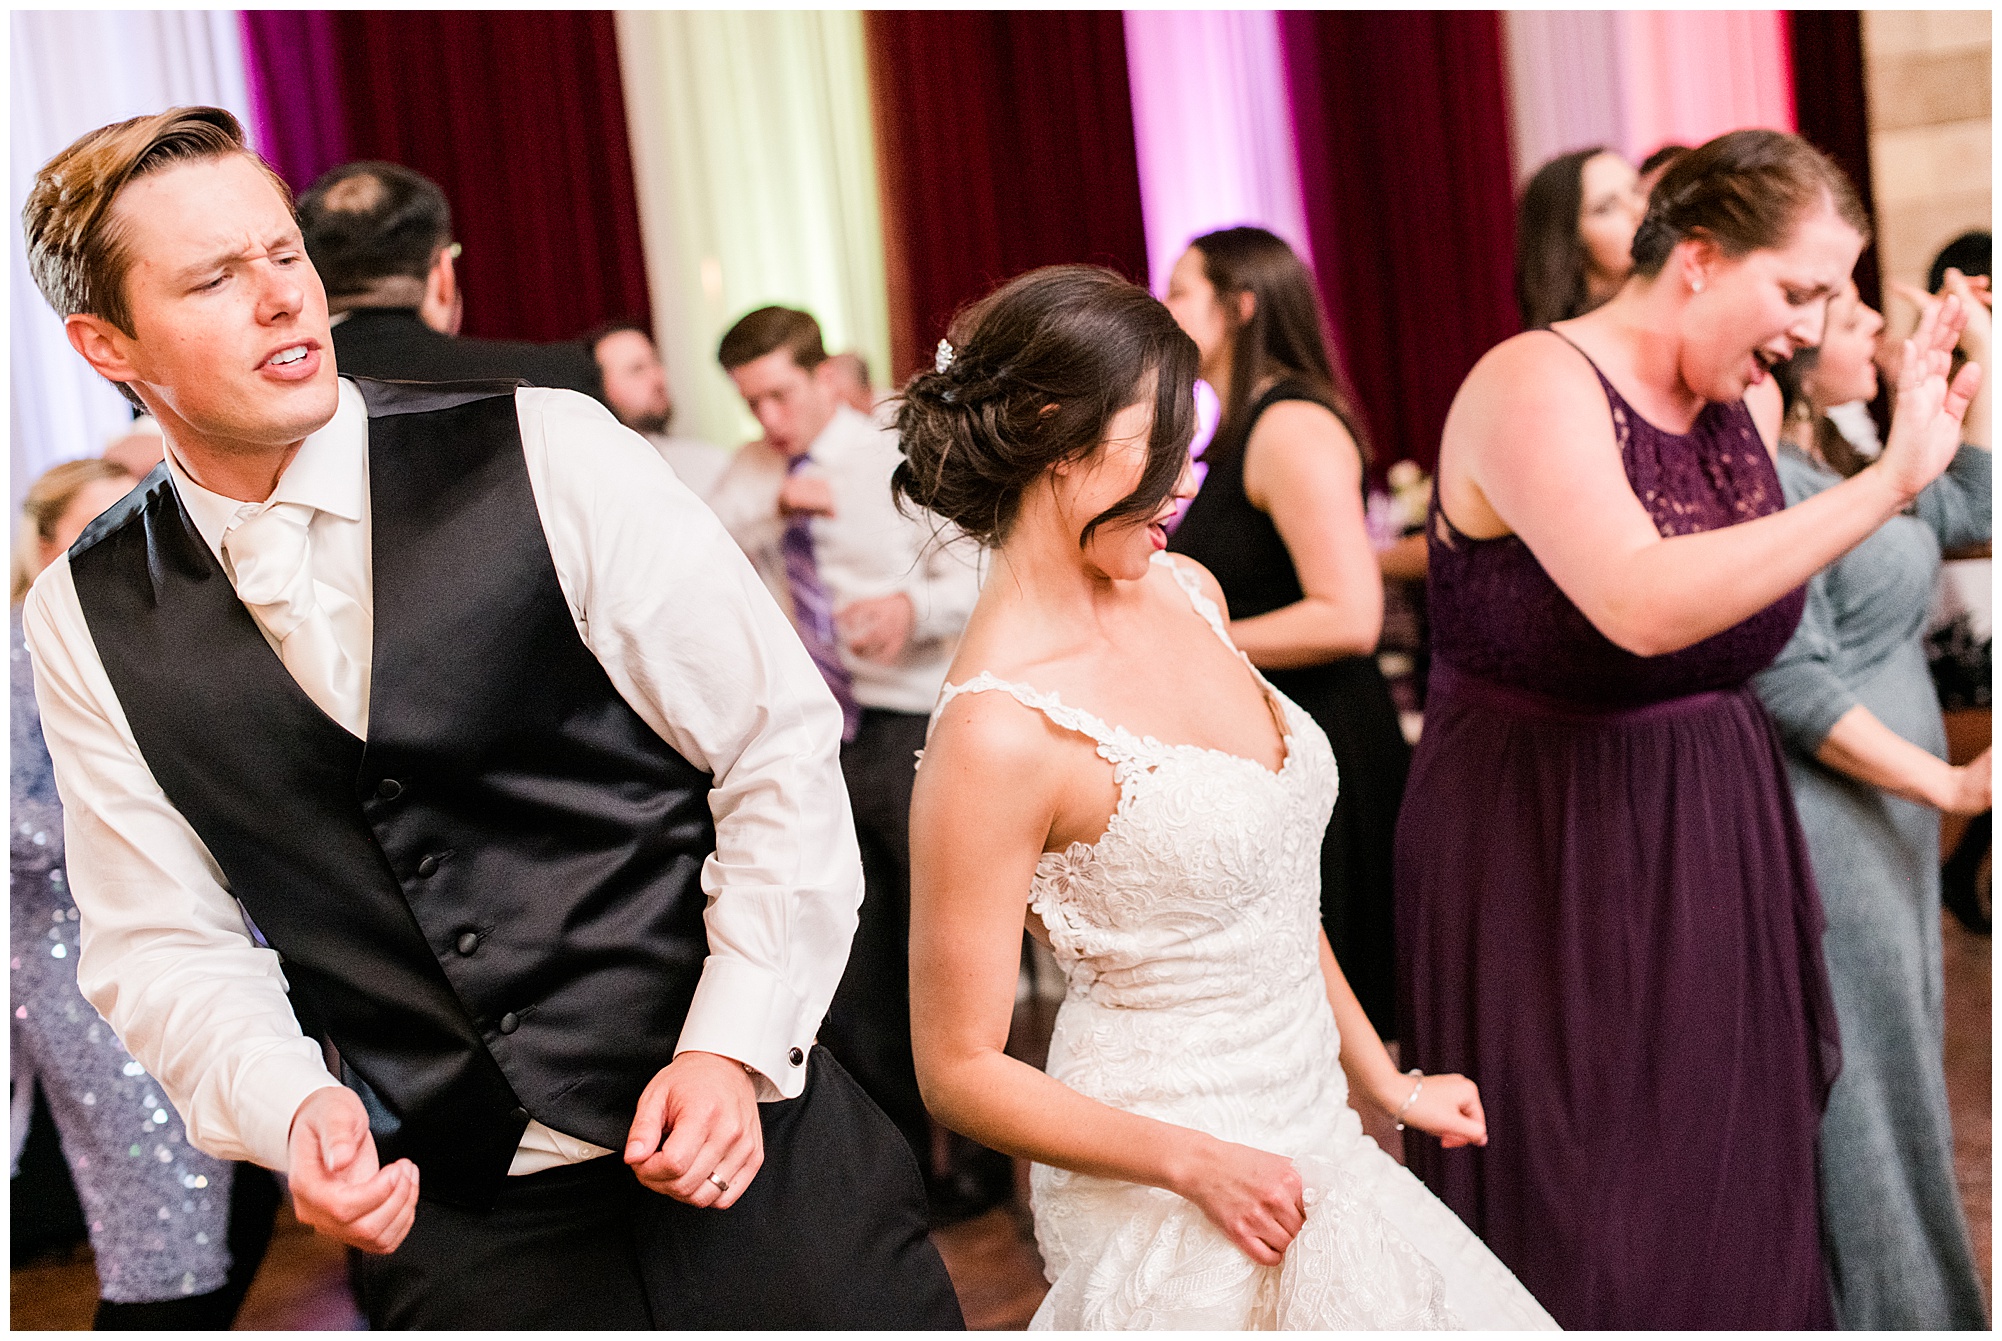 people dancing at dover hall wedding reception. by rva wedding photographer, sarah & dave photography.